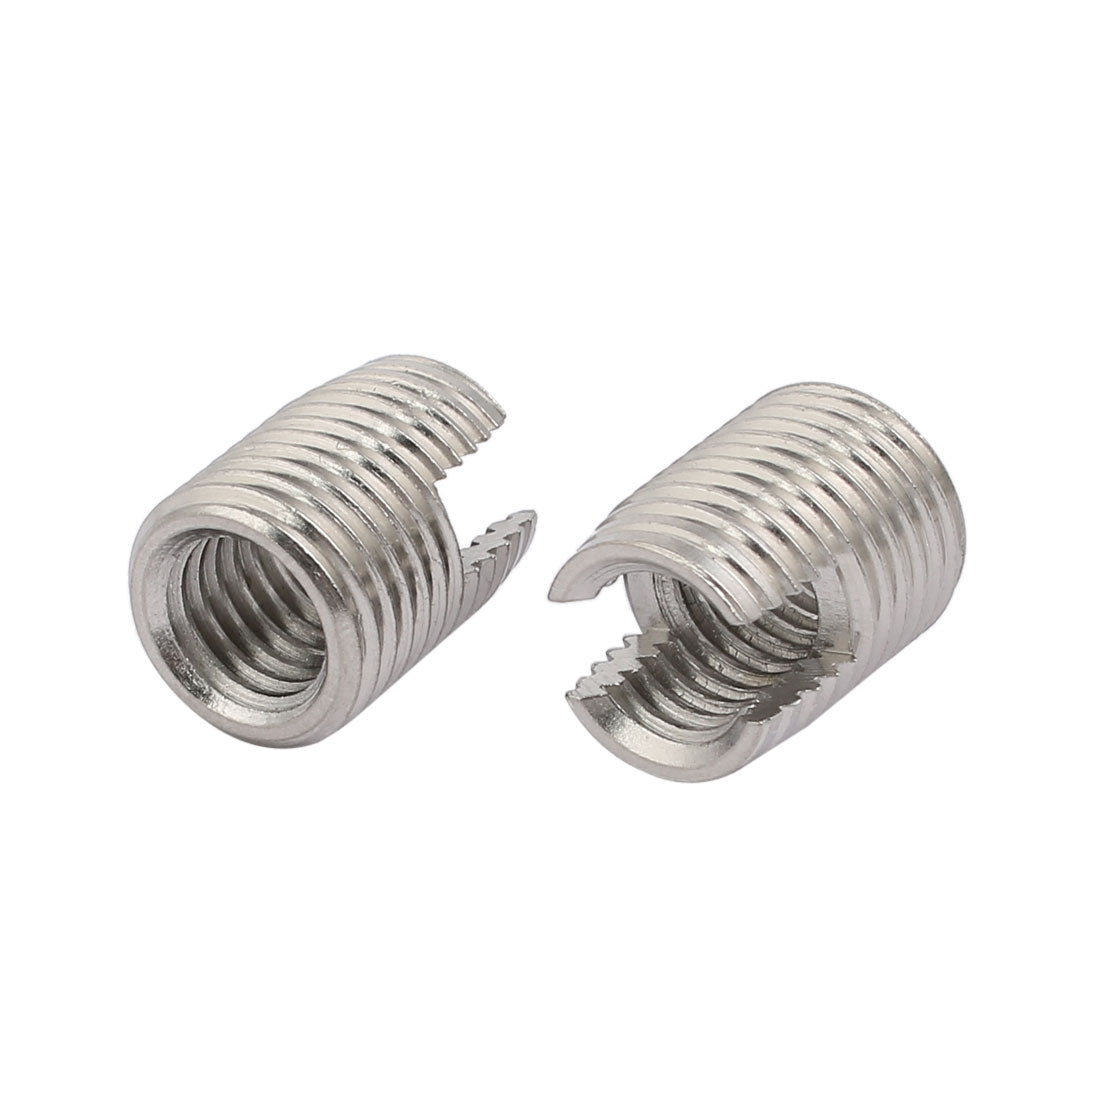 uxcell Uxcell M10x18mm 304 Stainless Steel Self Tapping Slotted Thread Insert 2pcs